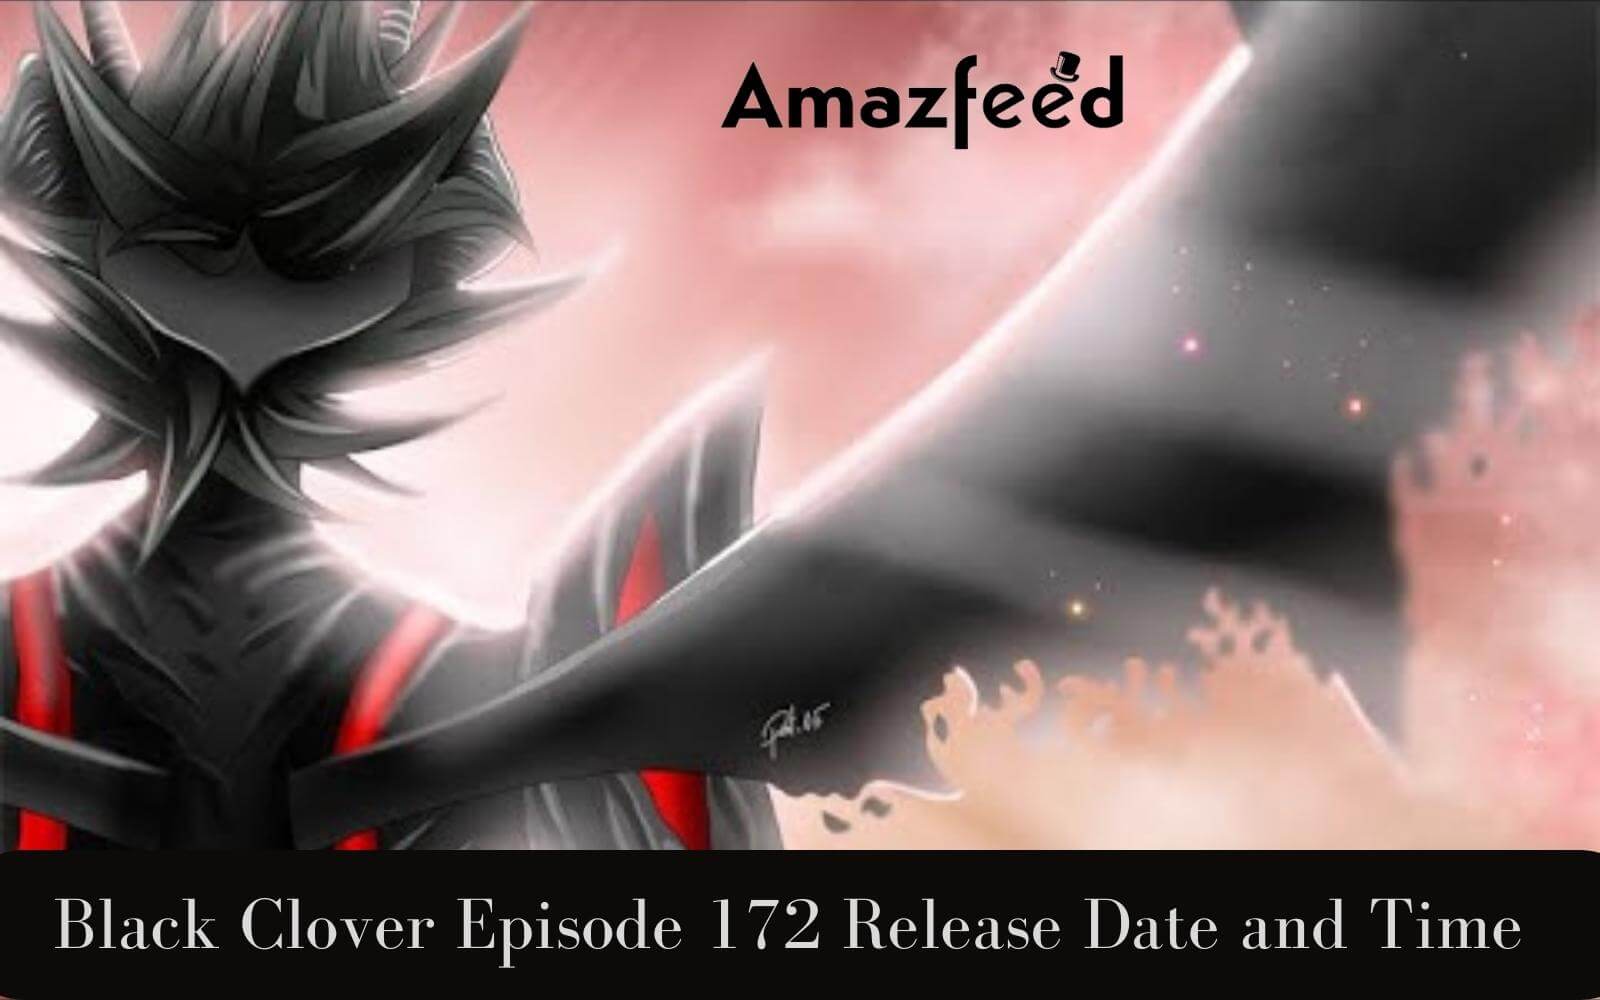 Finally, Black Clover Episode 171 Is Coming! Black Clover Episode 171  Release Date, Synopsis, Countdown & More » Amazfeed